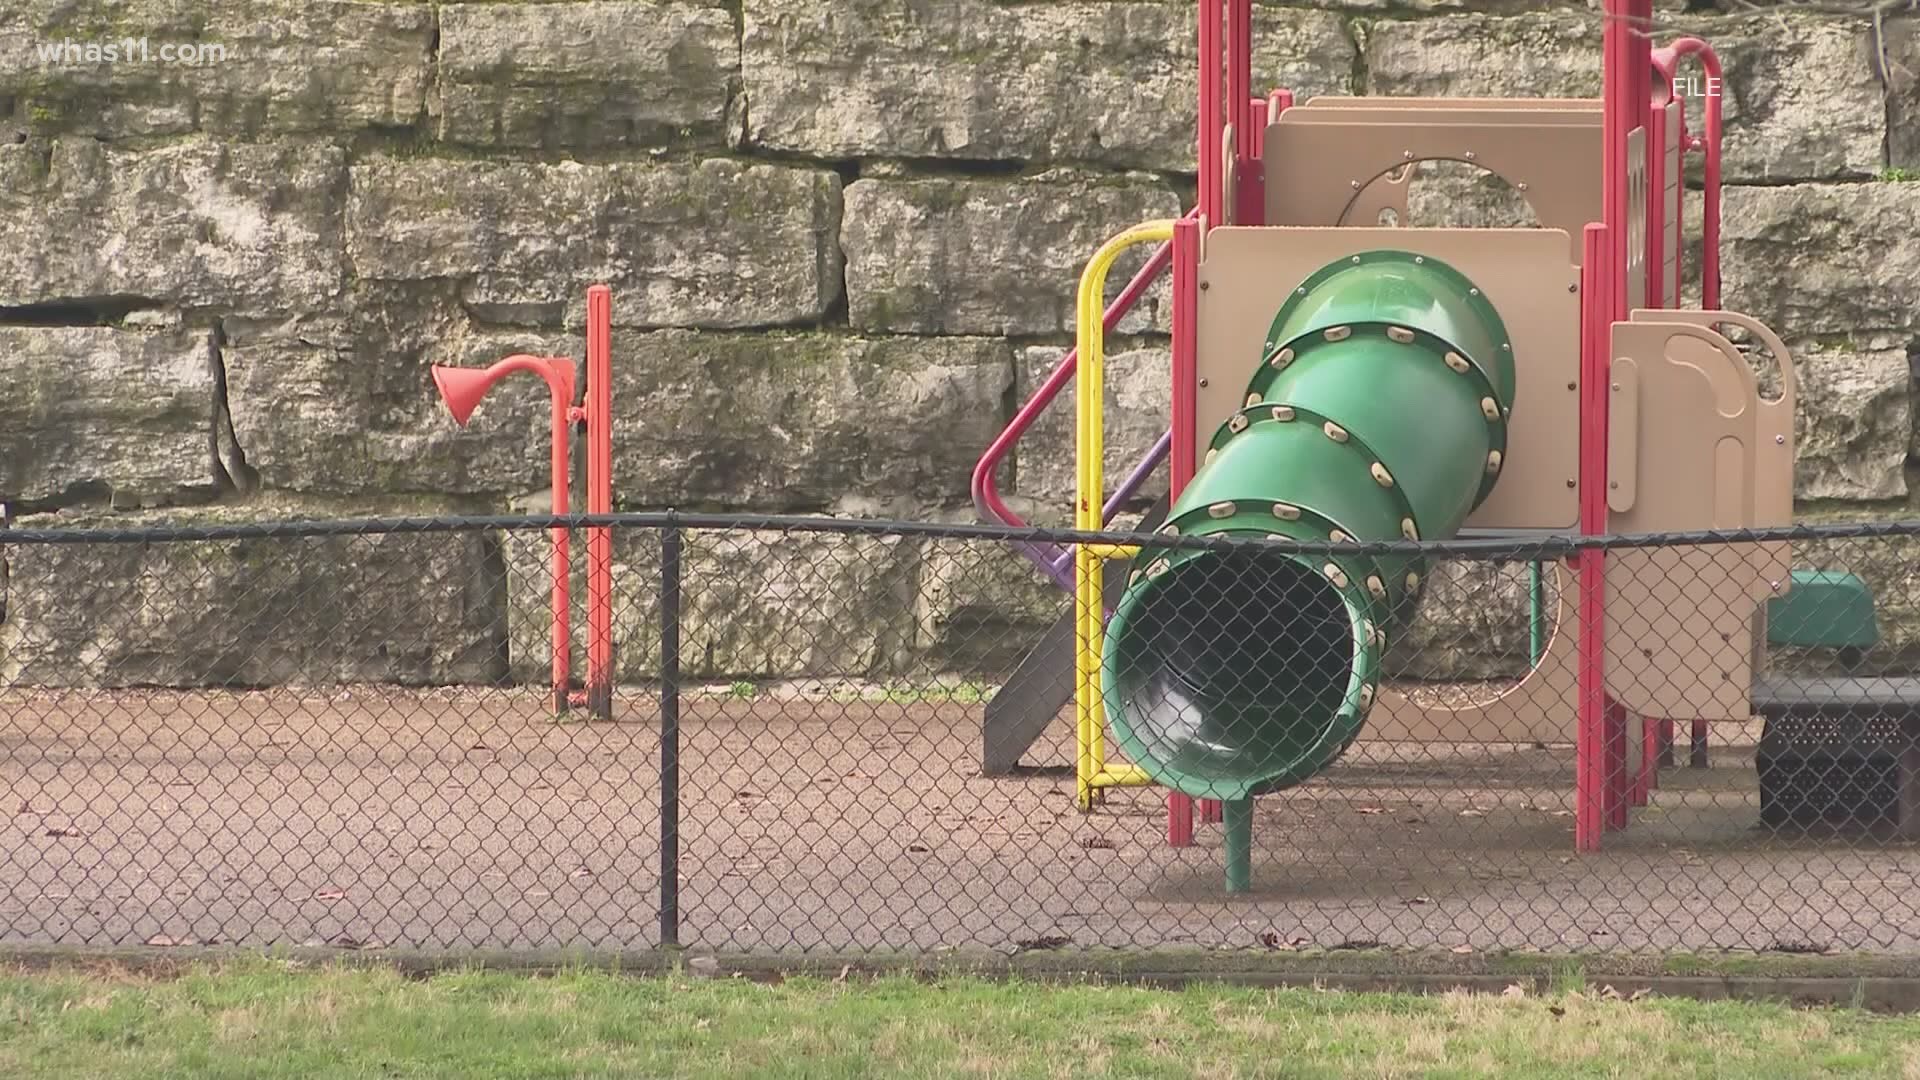 After months of closure, playgrounds in Louisville parks have reopened.